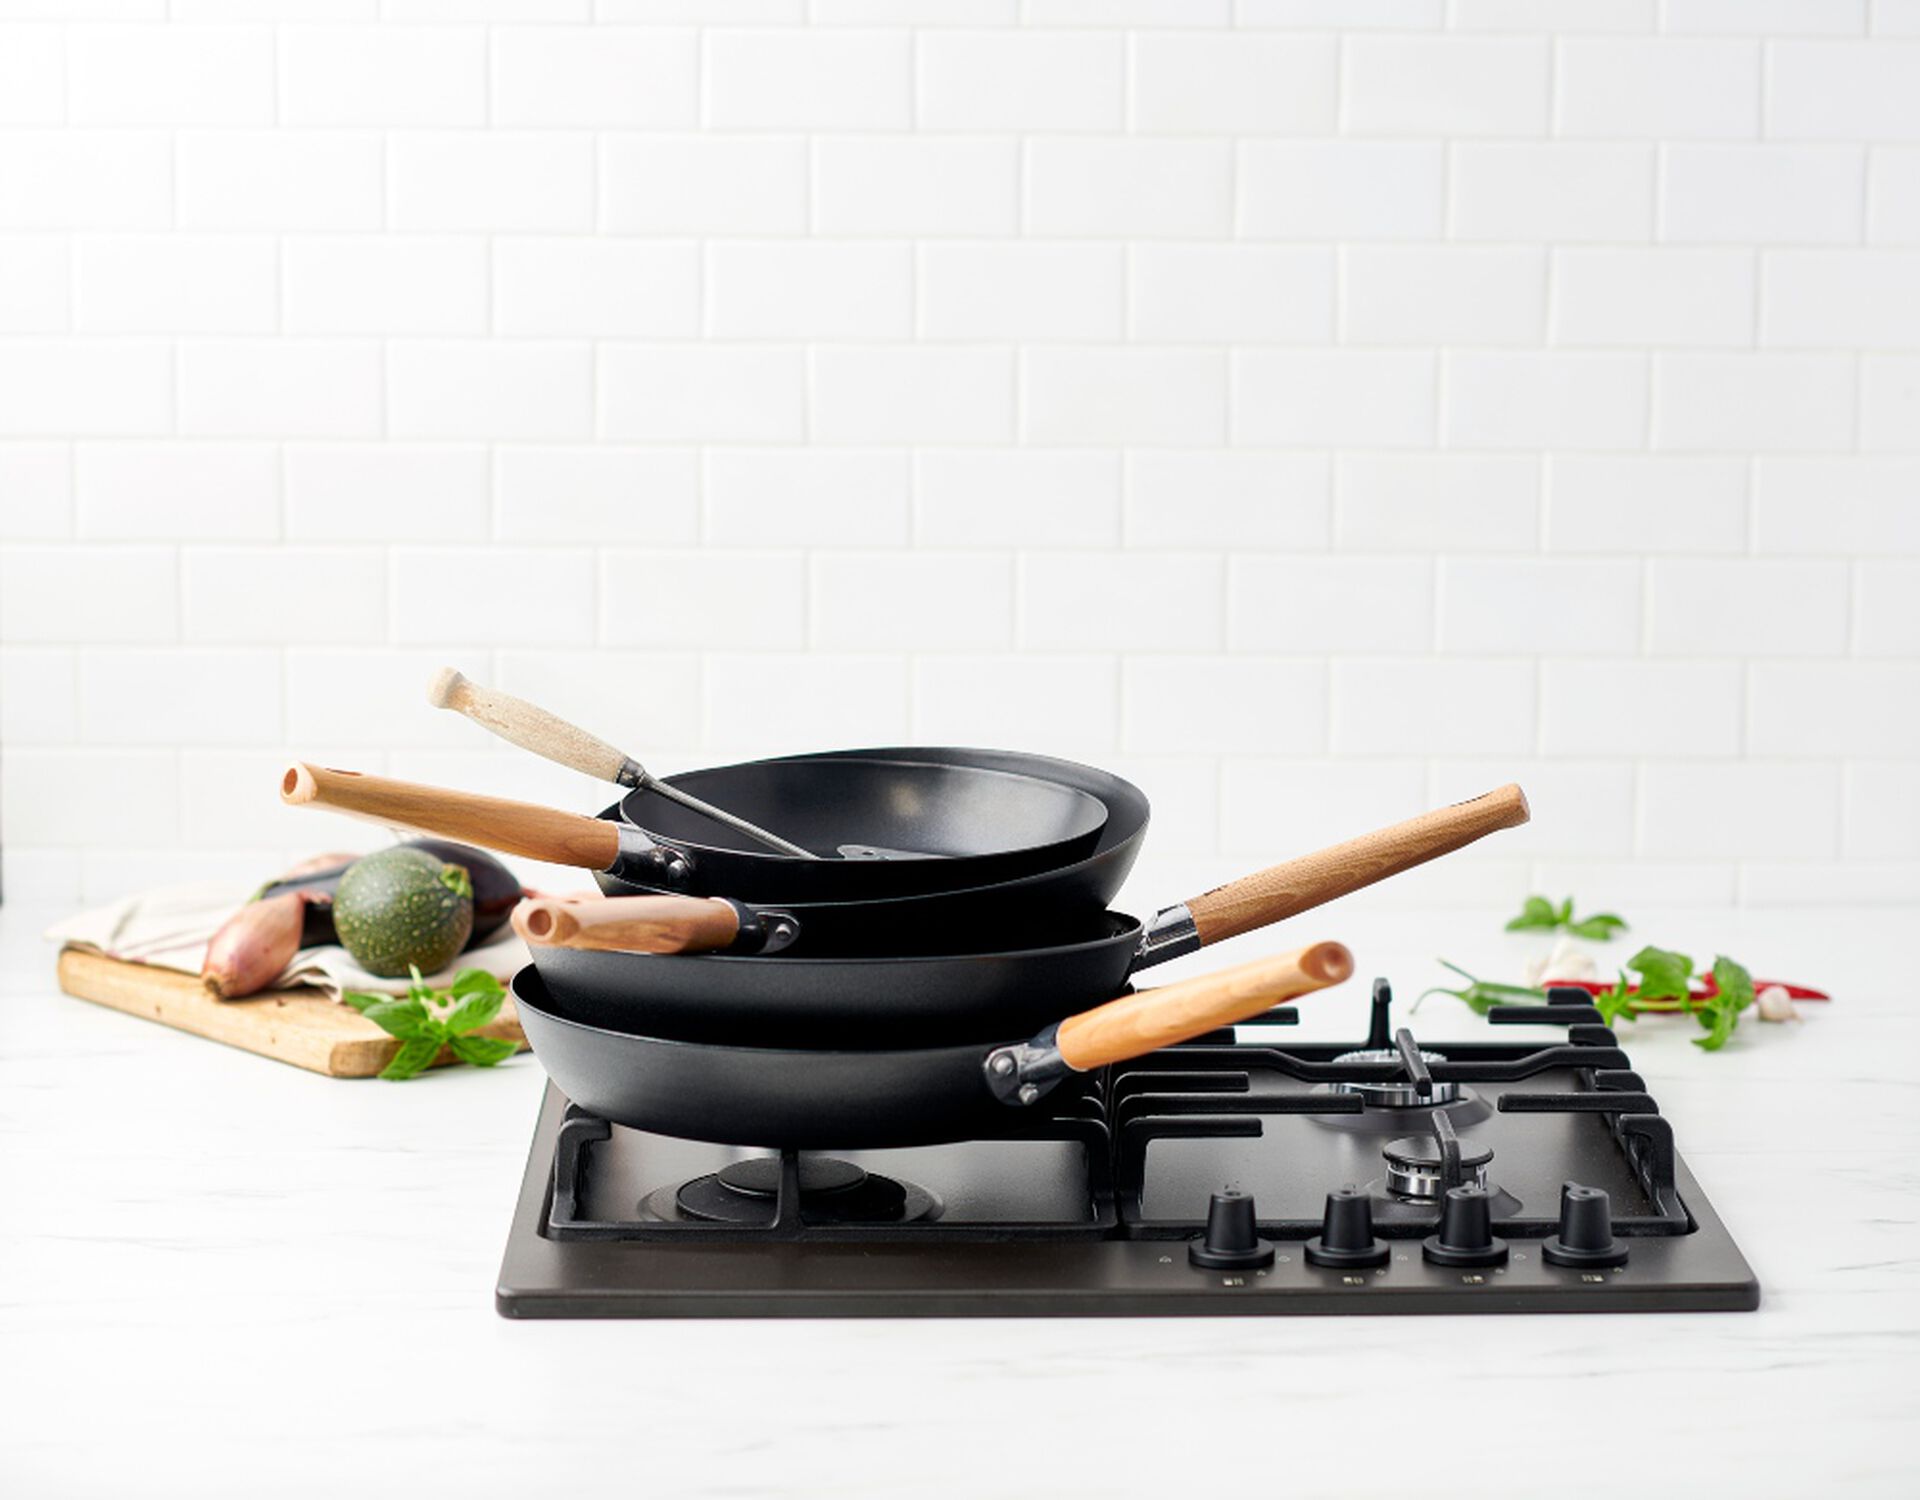 BK Frying Pan Force Carbon Steel - ø 28 cm - without non-stick